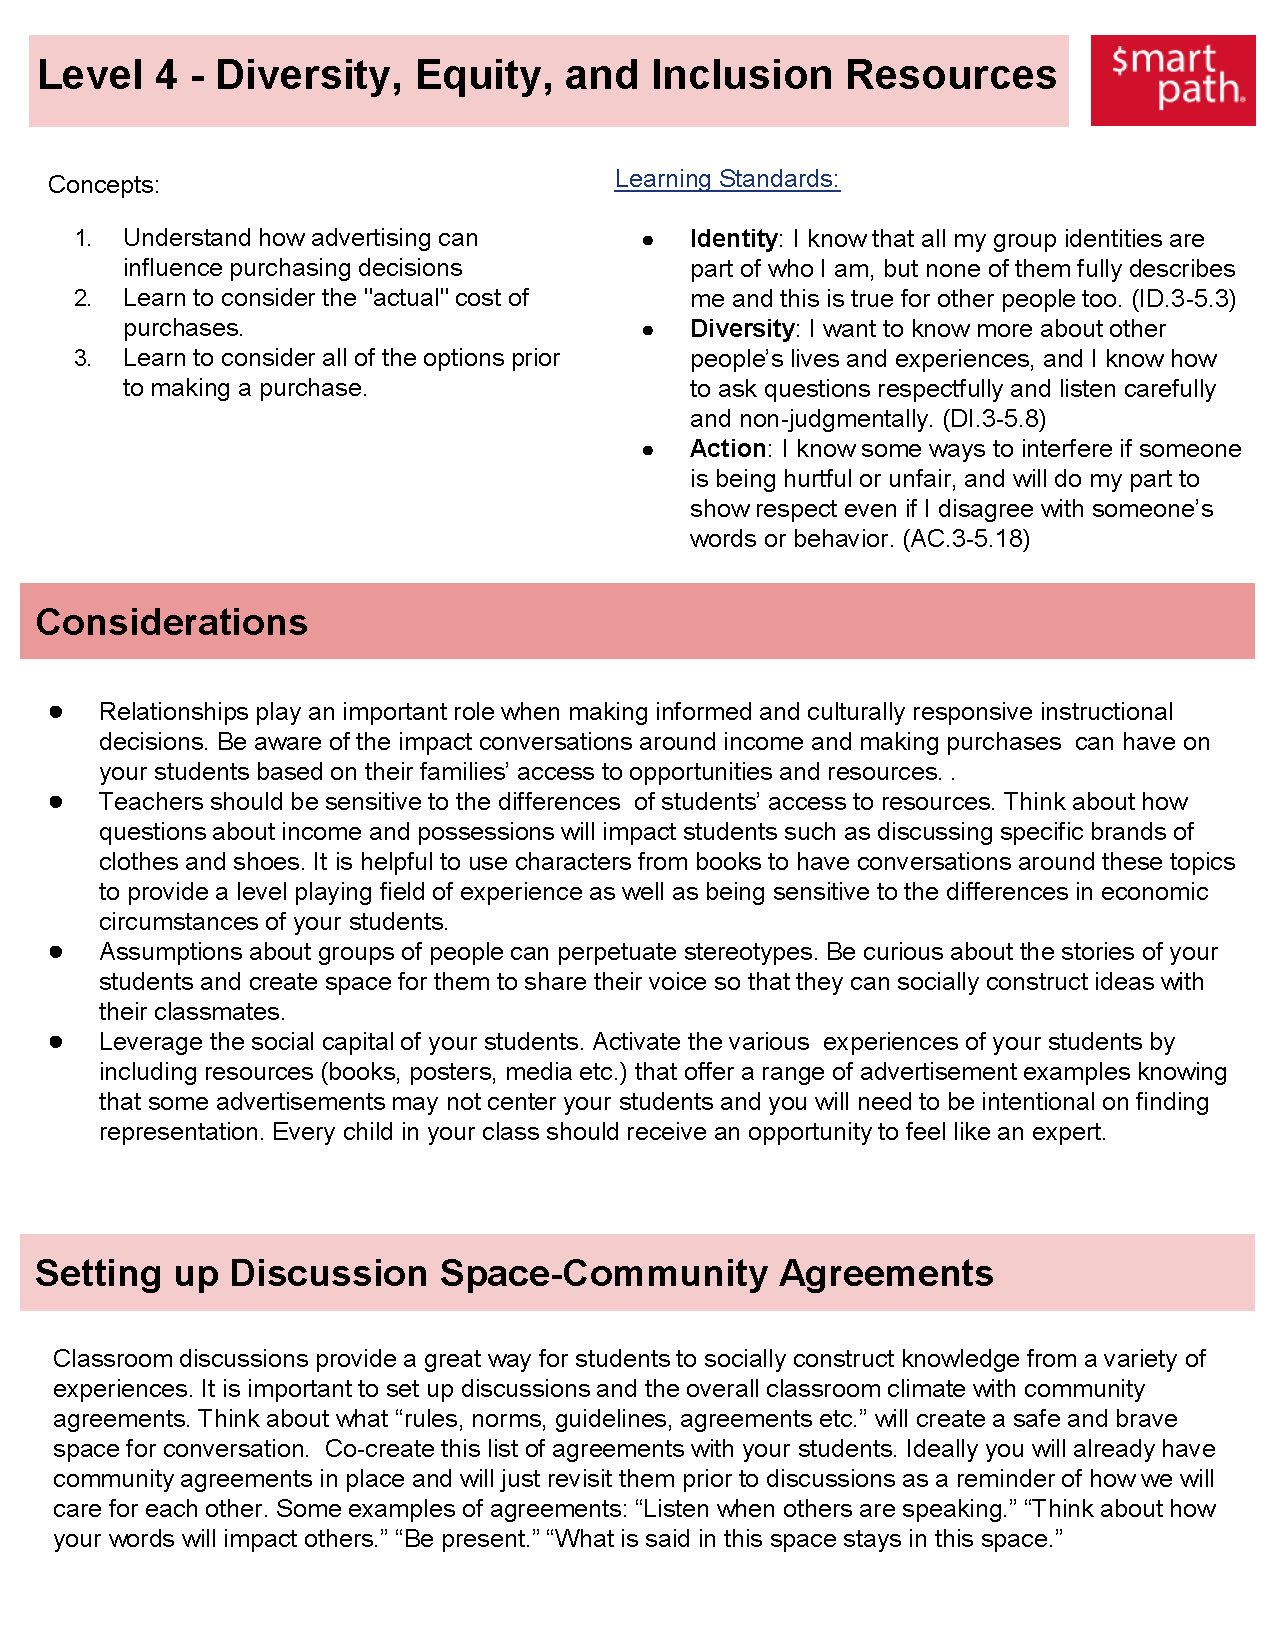 Level Four Diversity and Inclusion Guide_Page_1